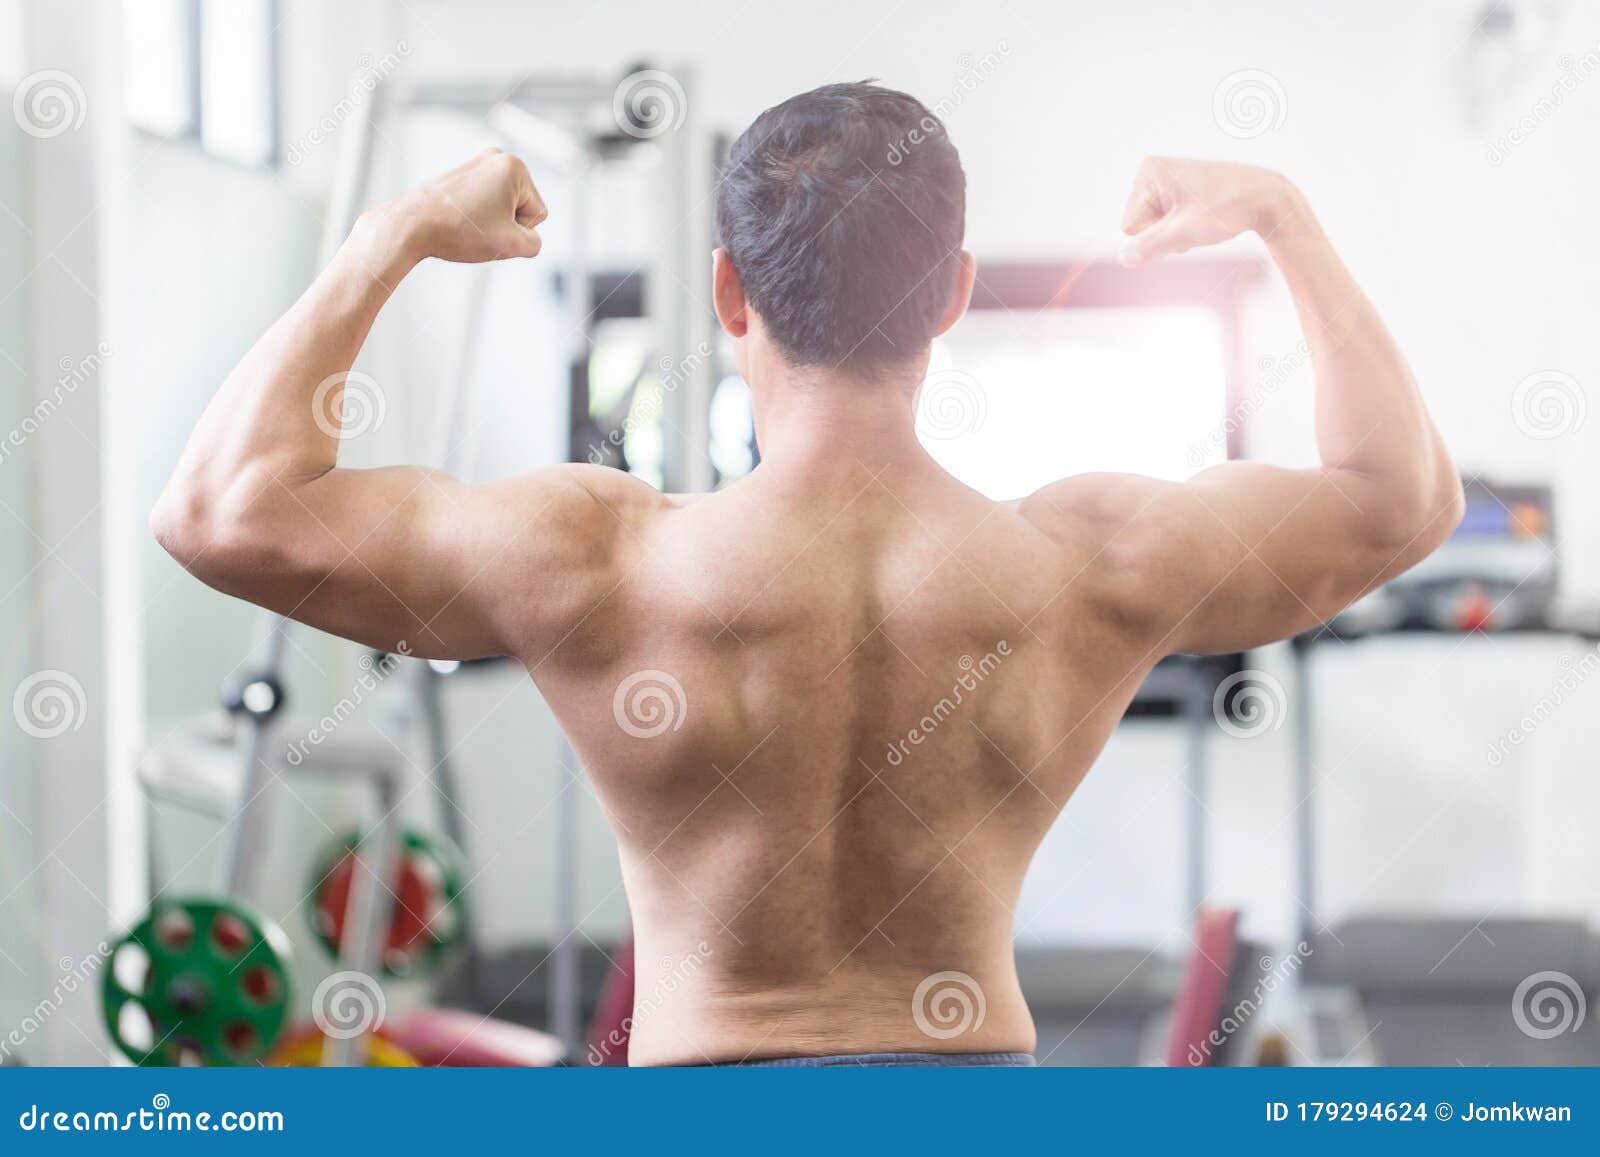 Back Of View Asian Men Doing Bodybuilder Rear Double Biceps Pose In Gym